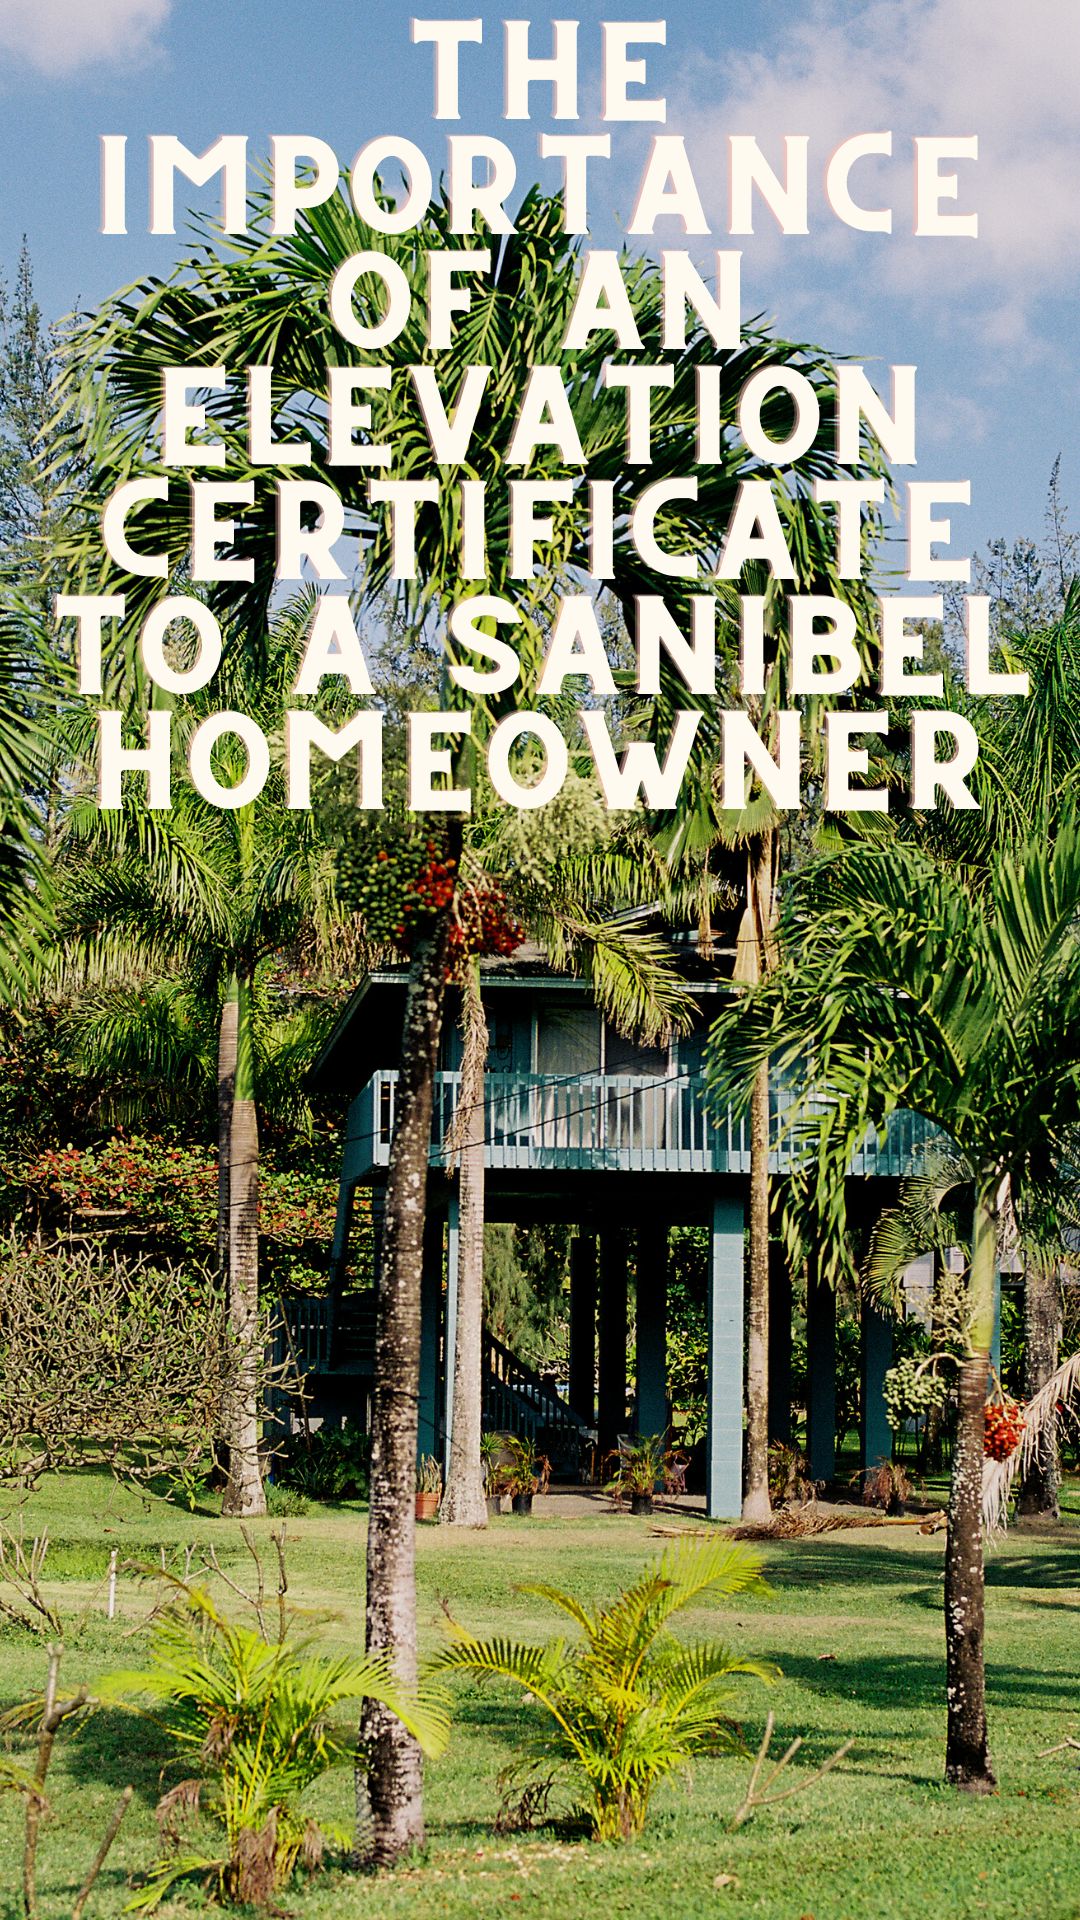 The Importance of an Elevation Certificate to a Sanibel Homeowner